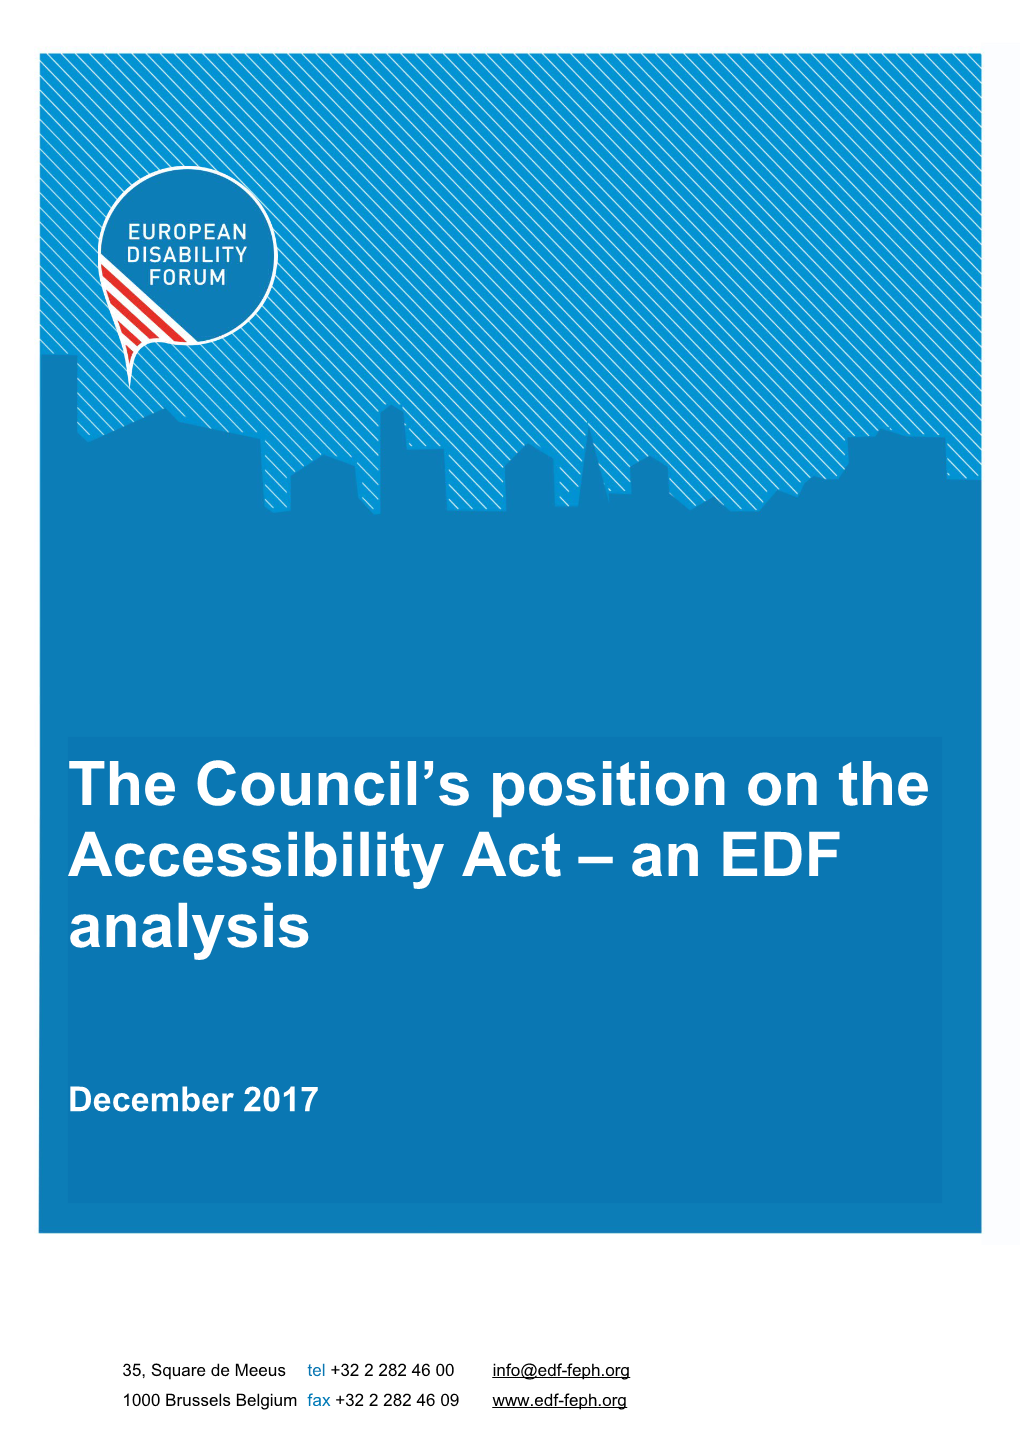 EDF Analysis of Council's Position on the Accessbility Act